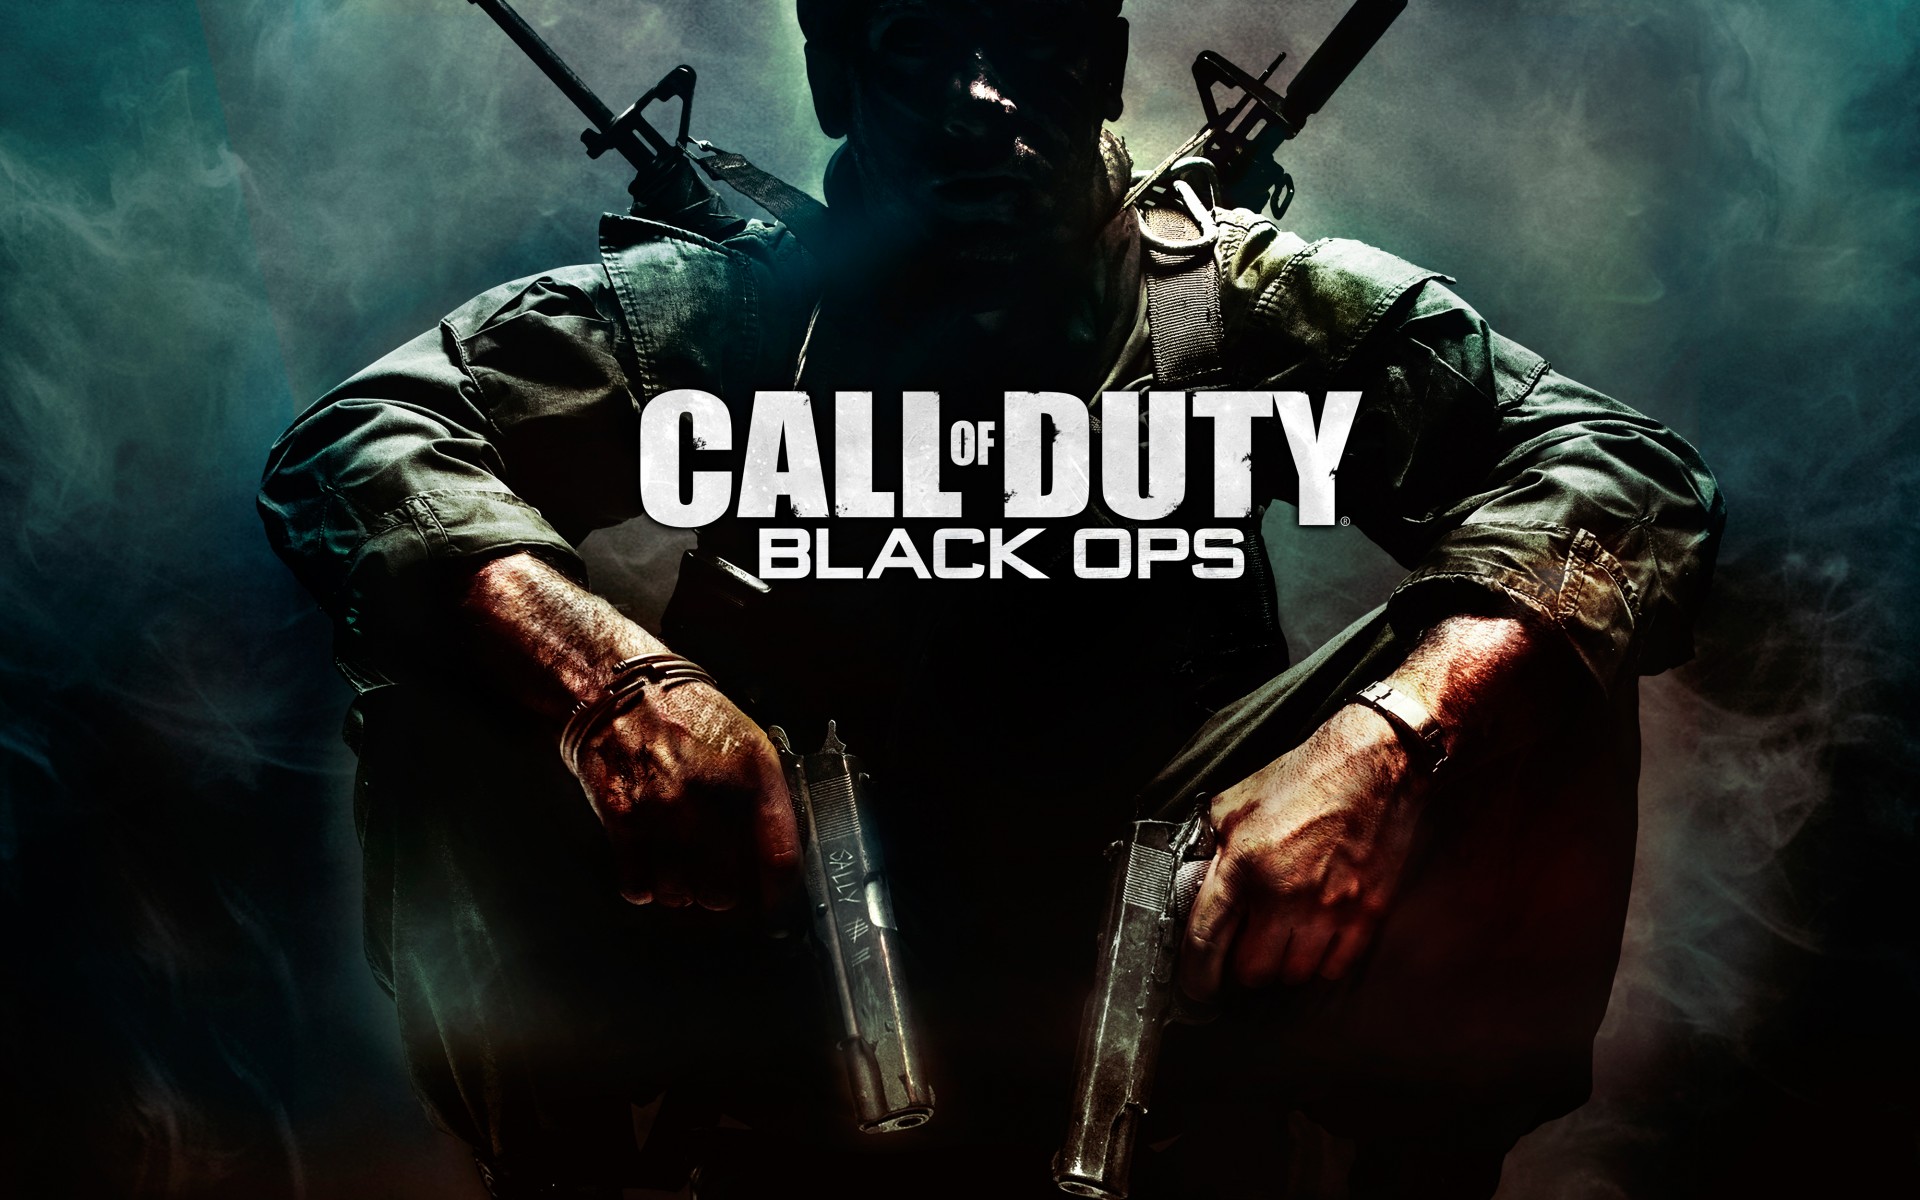 The Call Of Duty: Black Ops- games